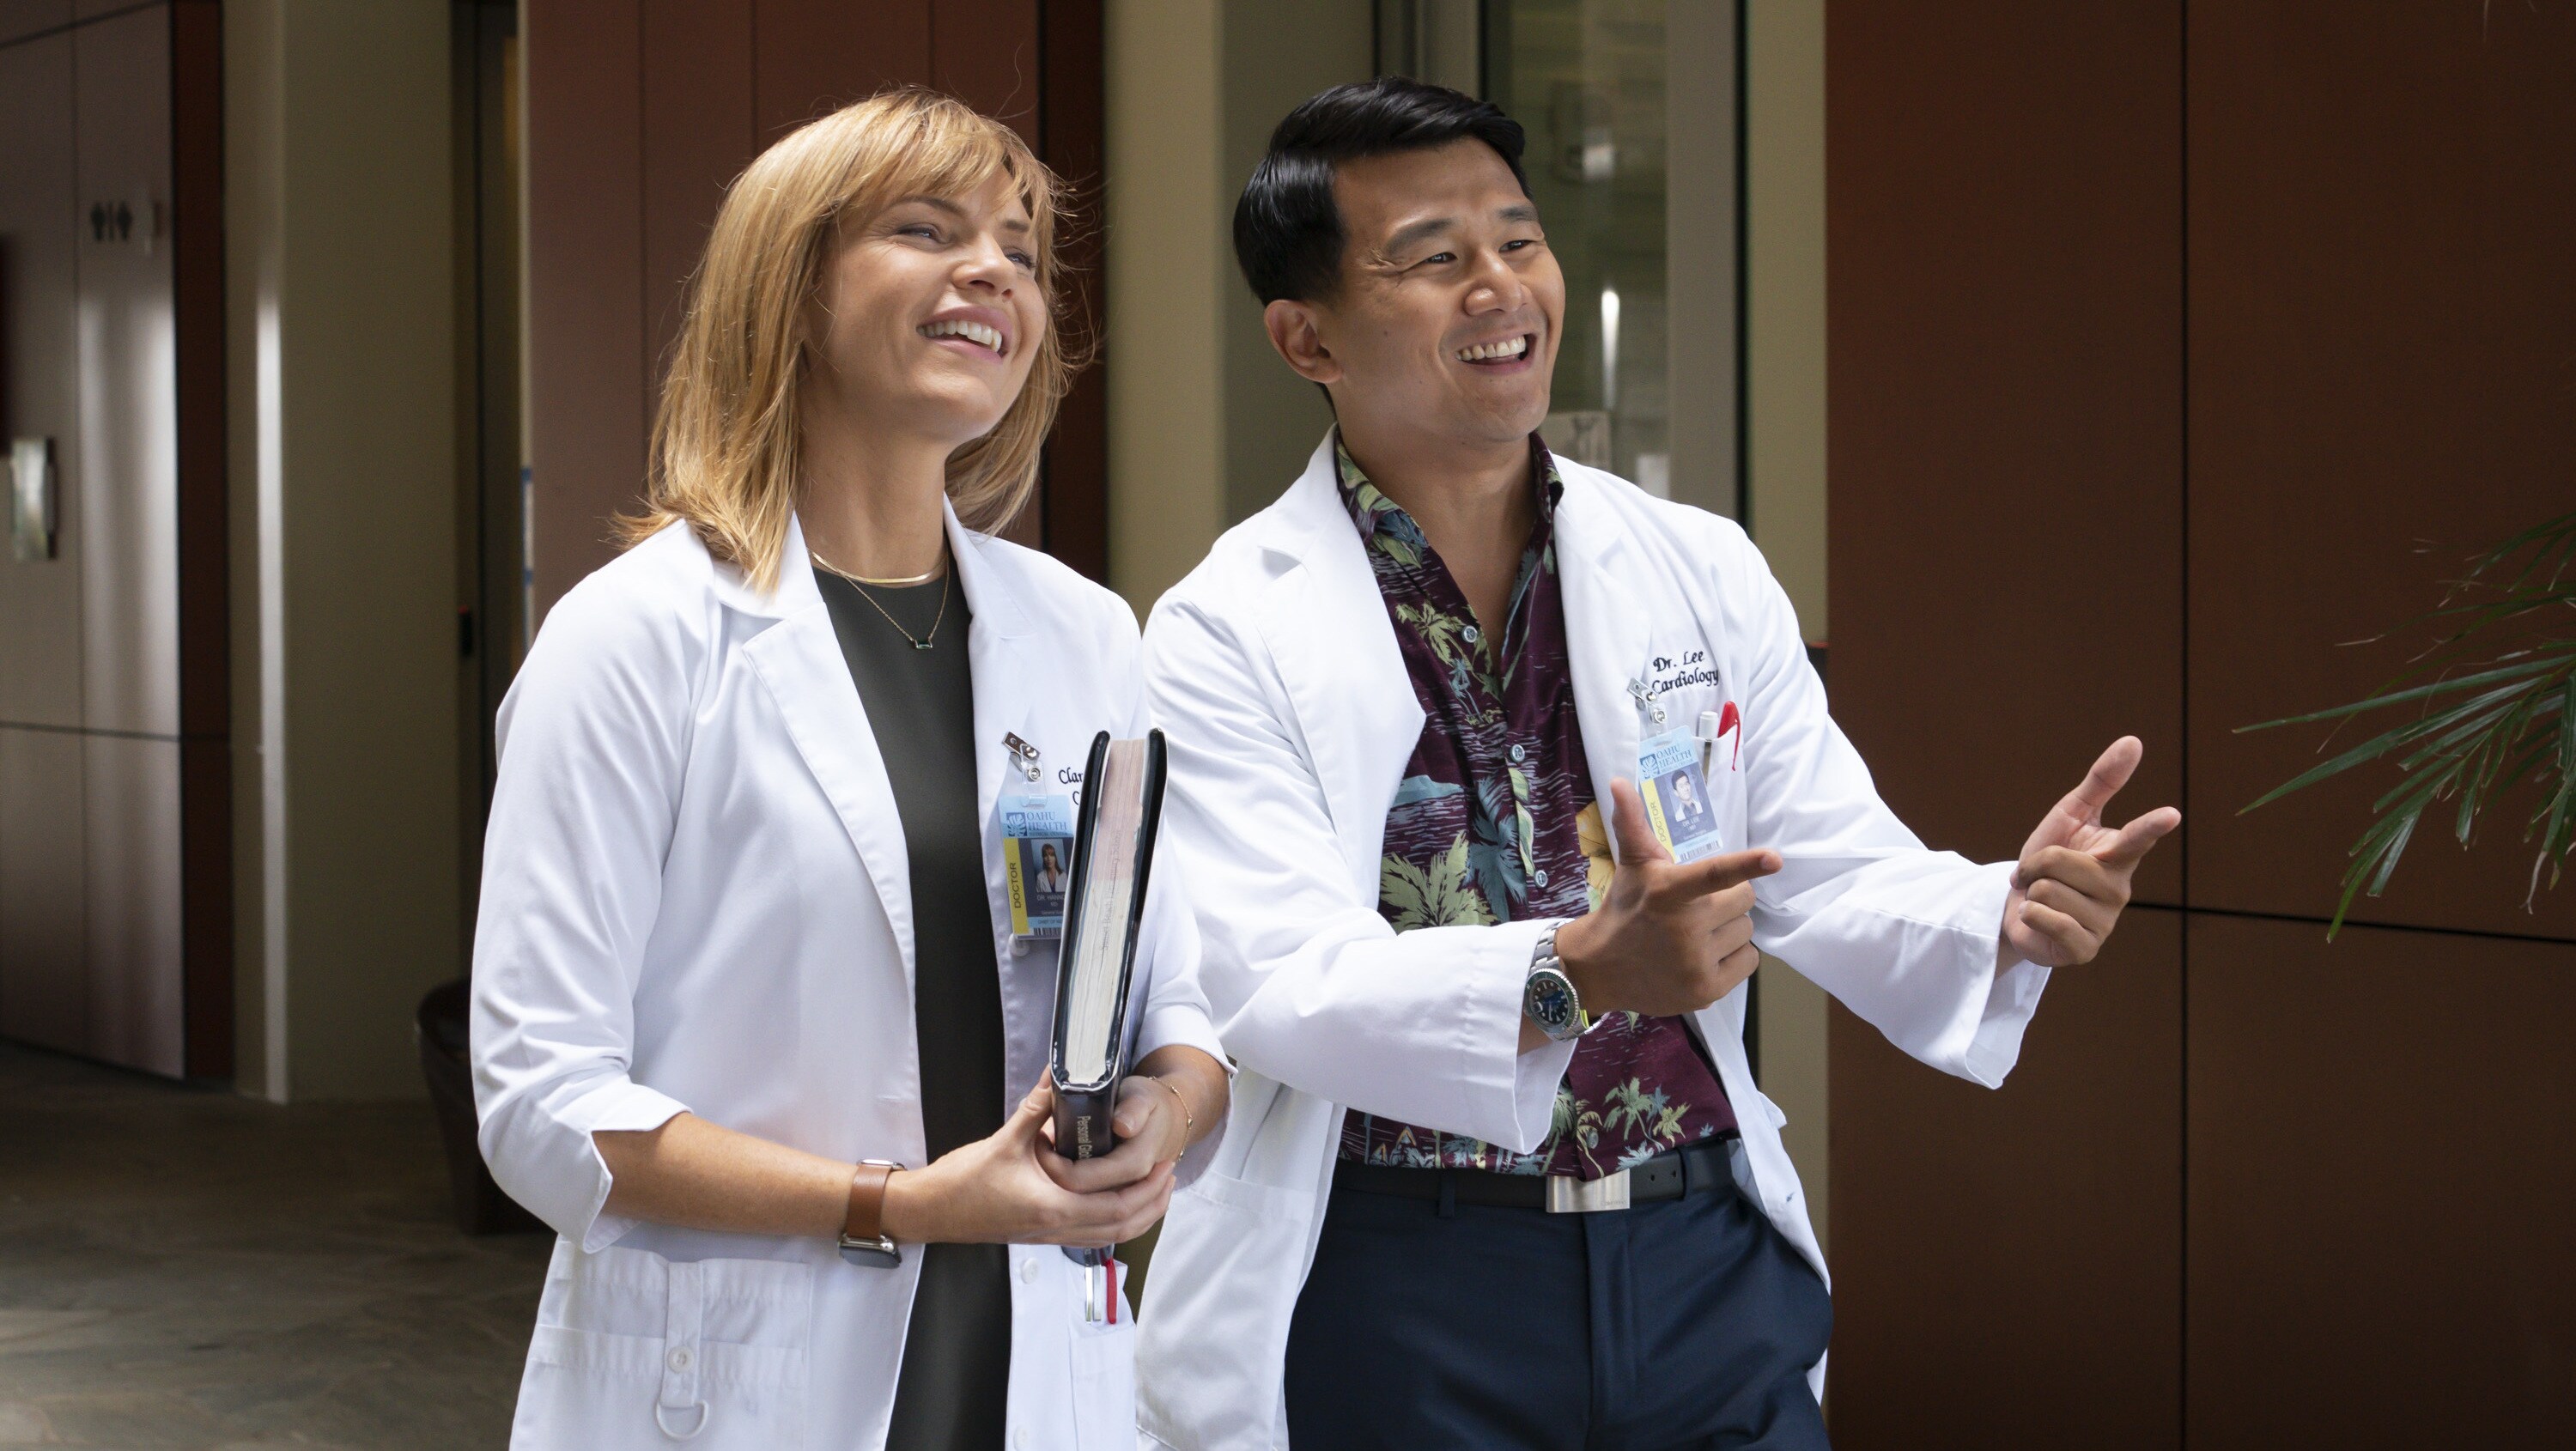 DOOGIE KAMEALOHA, M.D. - “Mom-mentum” - Lahela considers a fellowship in Seattle; Benny ends up in the seniors group at a surf competition. (Disney/Karen Neal) KATHLEEN ROSE PERKINS, RONNY CHIENG